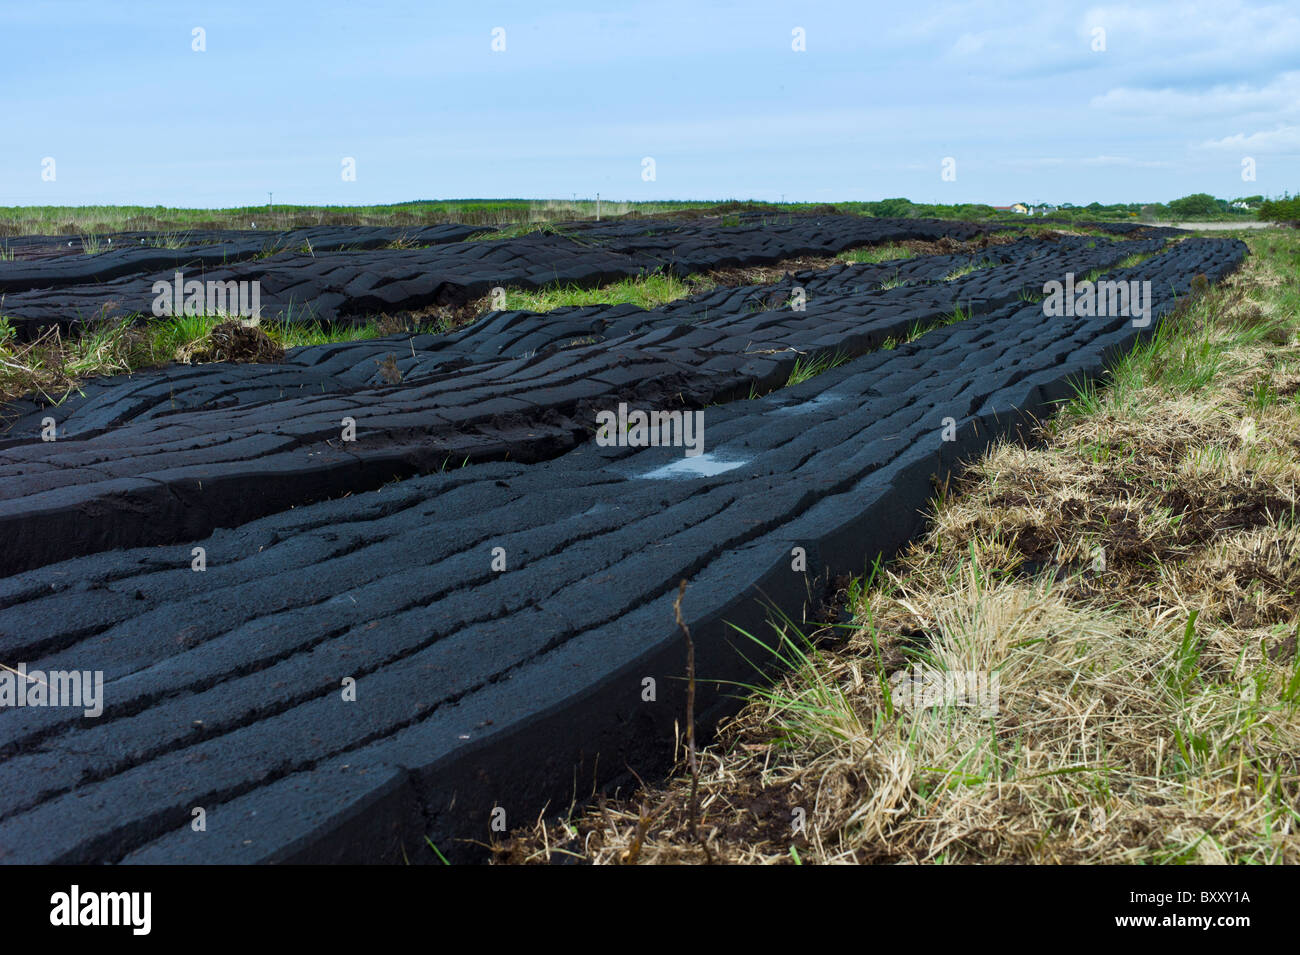 Turf cut by machine laid out to dry at Mountrivers peat bog, County Clare, West of Ireland Stock Photo